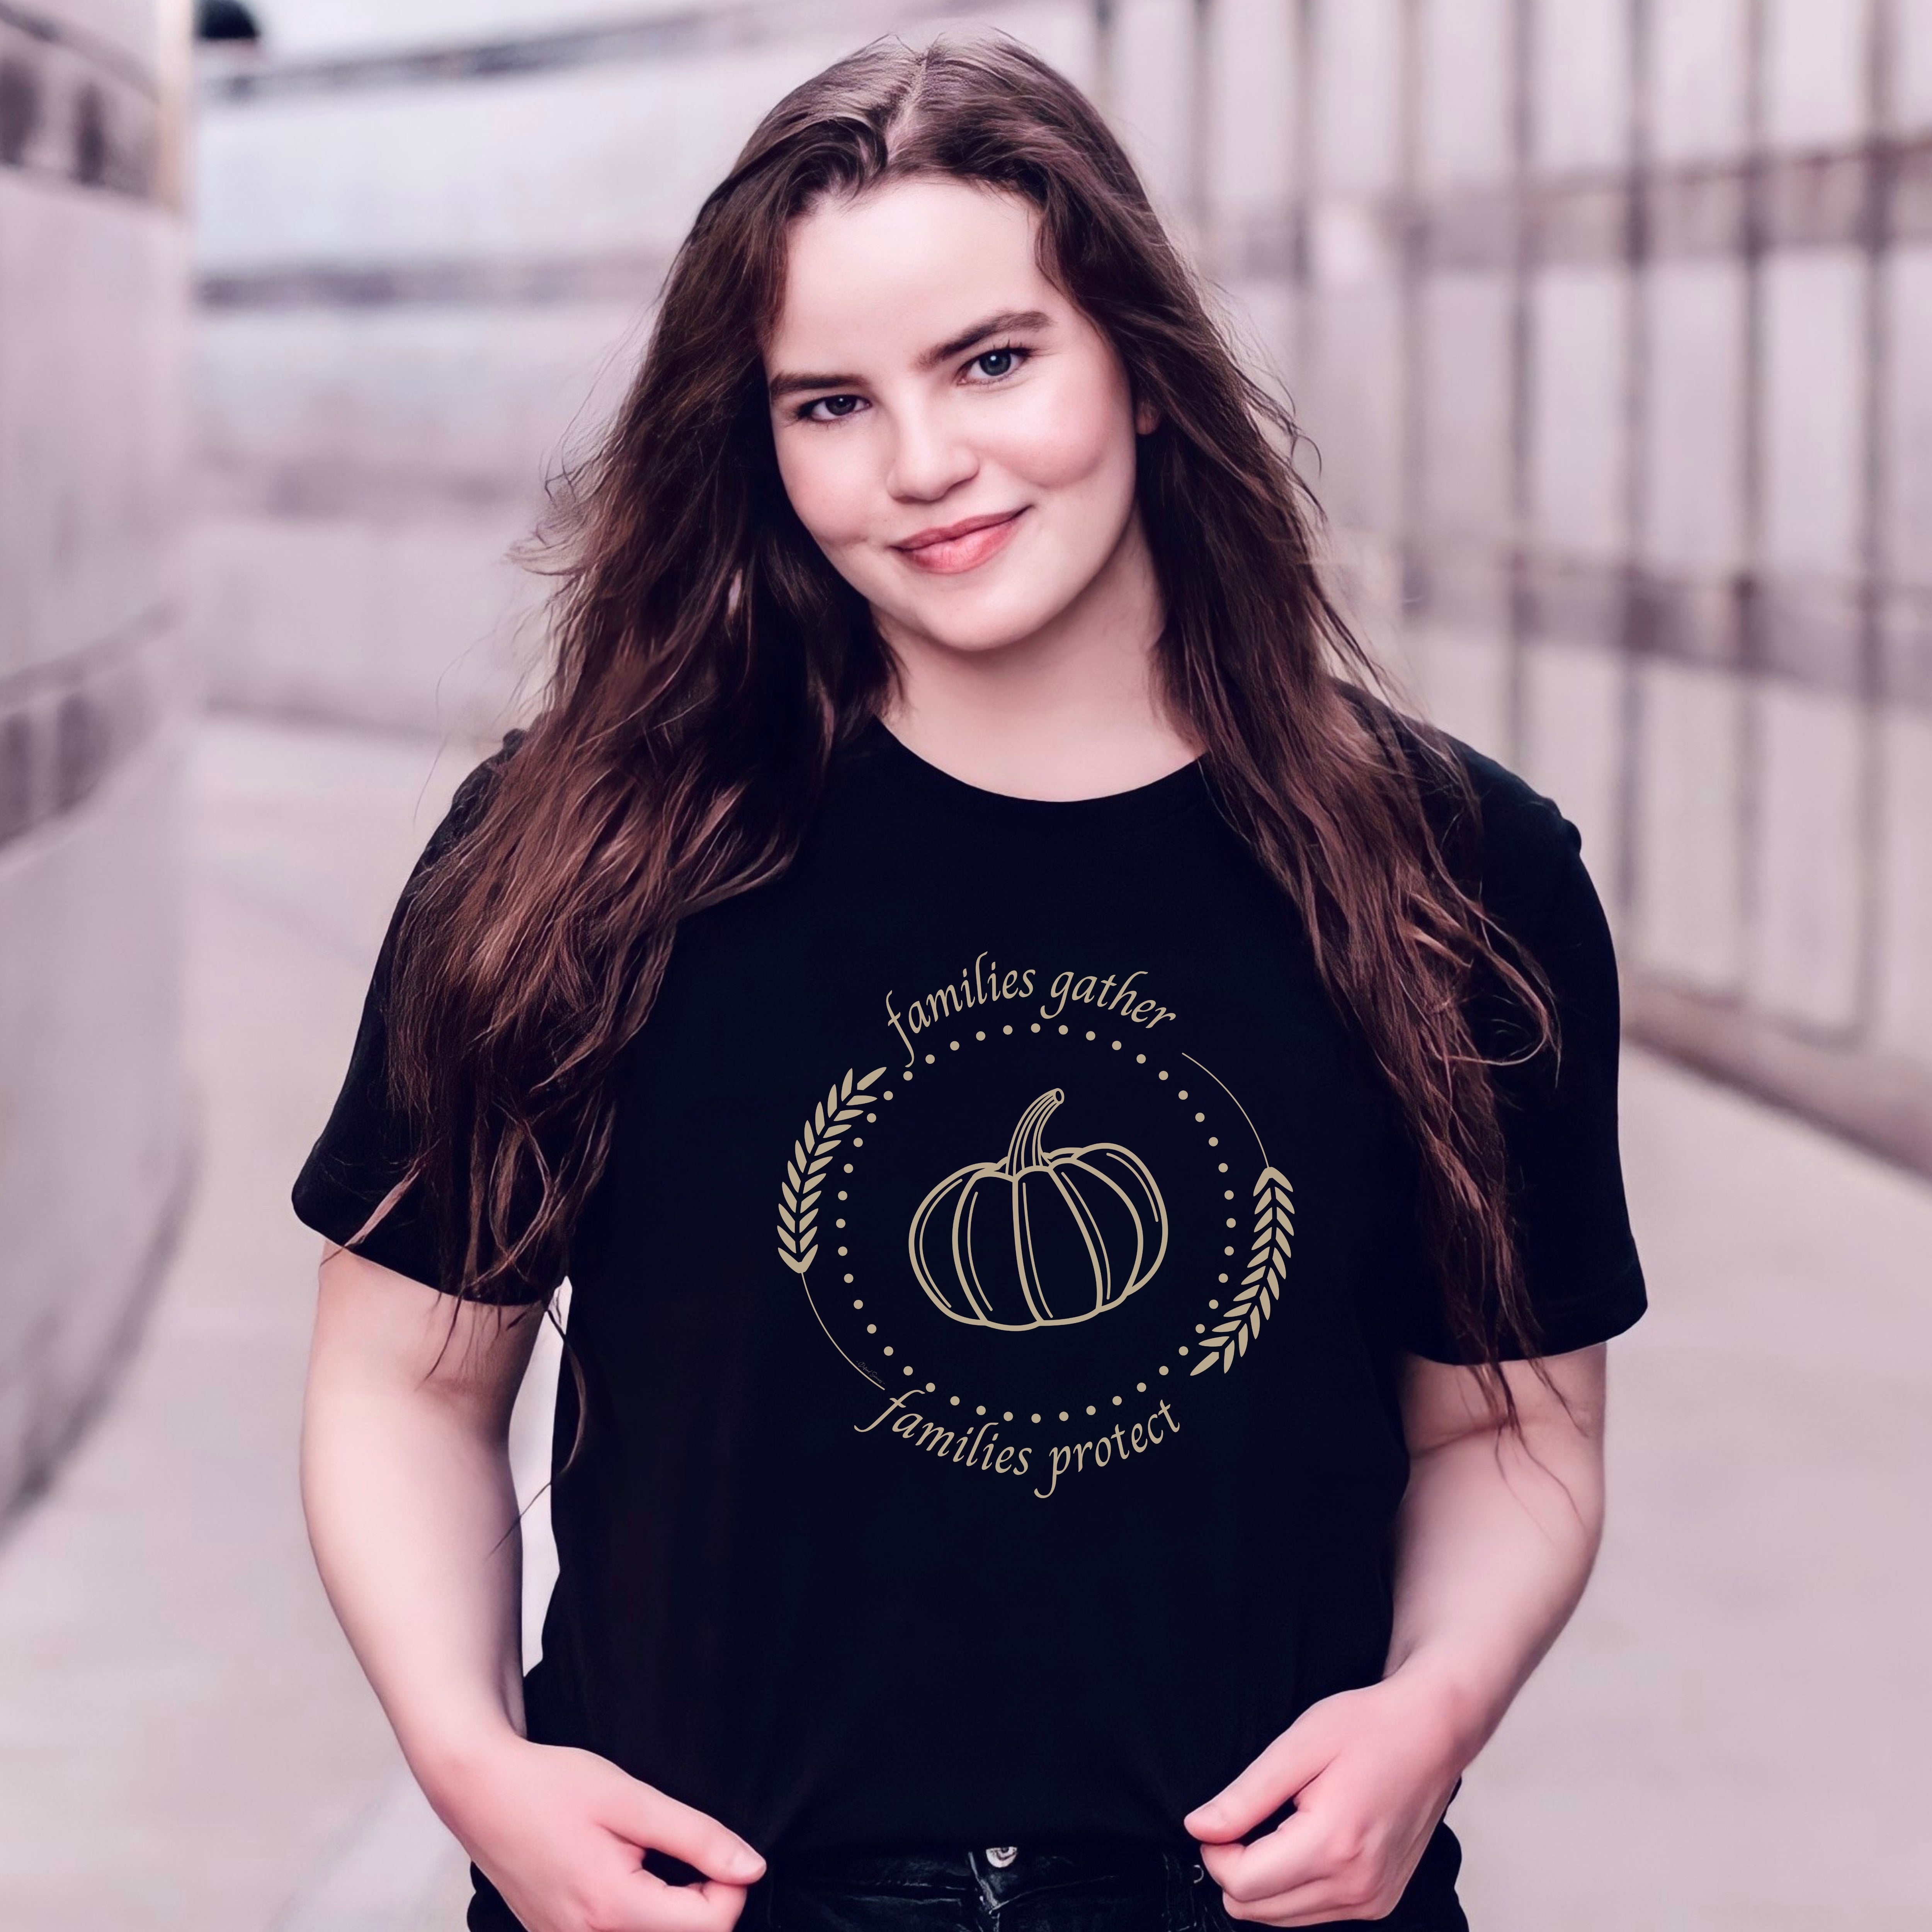 Adorned with a heartwarming autumn-fall harvest pumpkin graphic and the inspiring message Families Gather, Families Protect, this Black T-shirt stands as a testament to the unwavering support and protection families should offer to survivors.